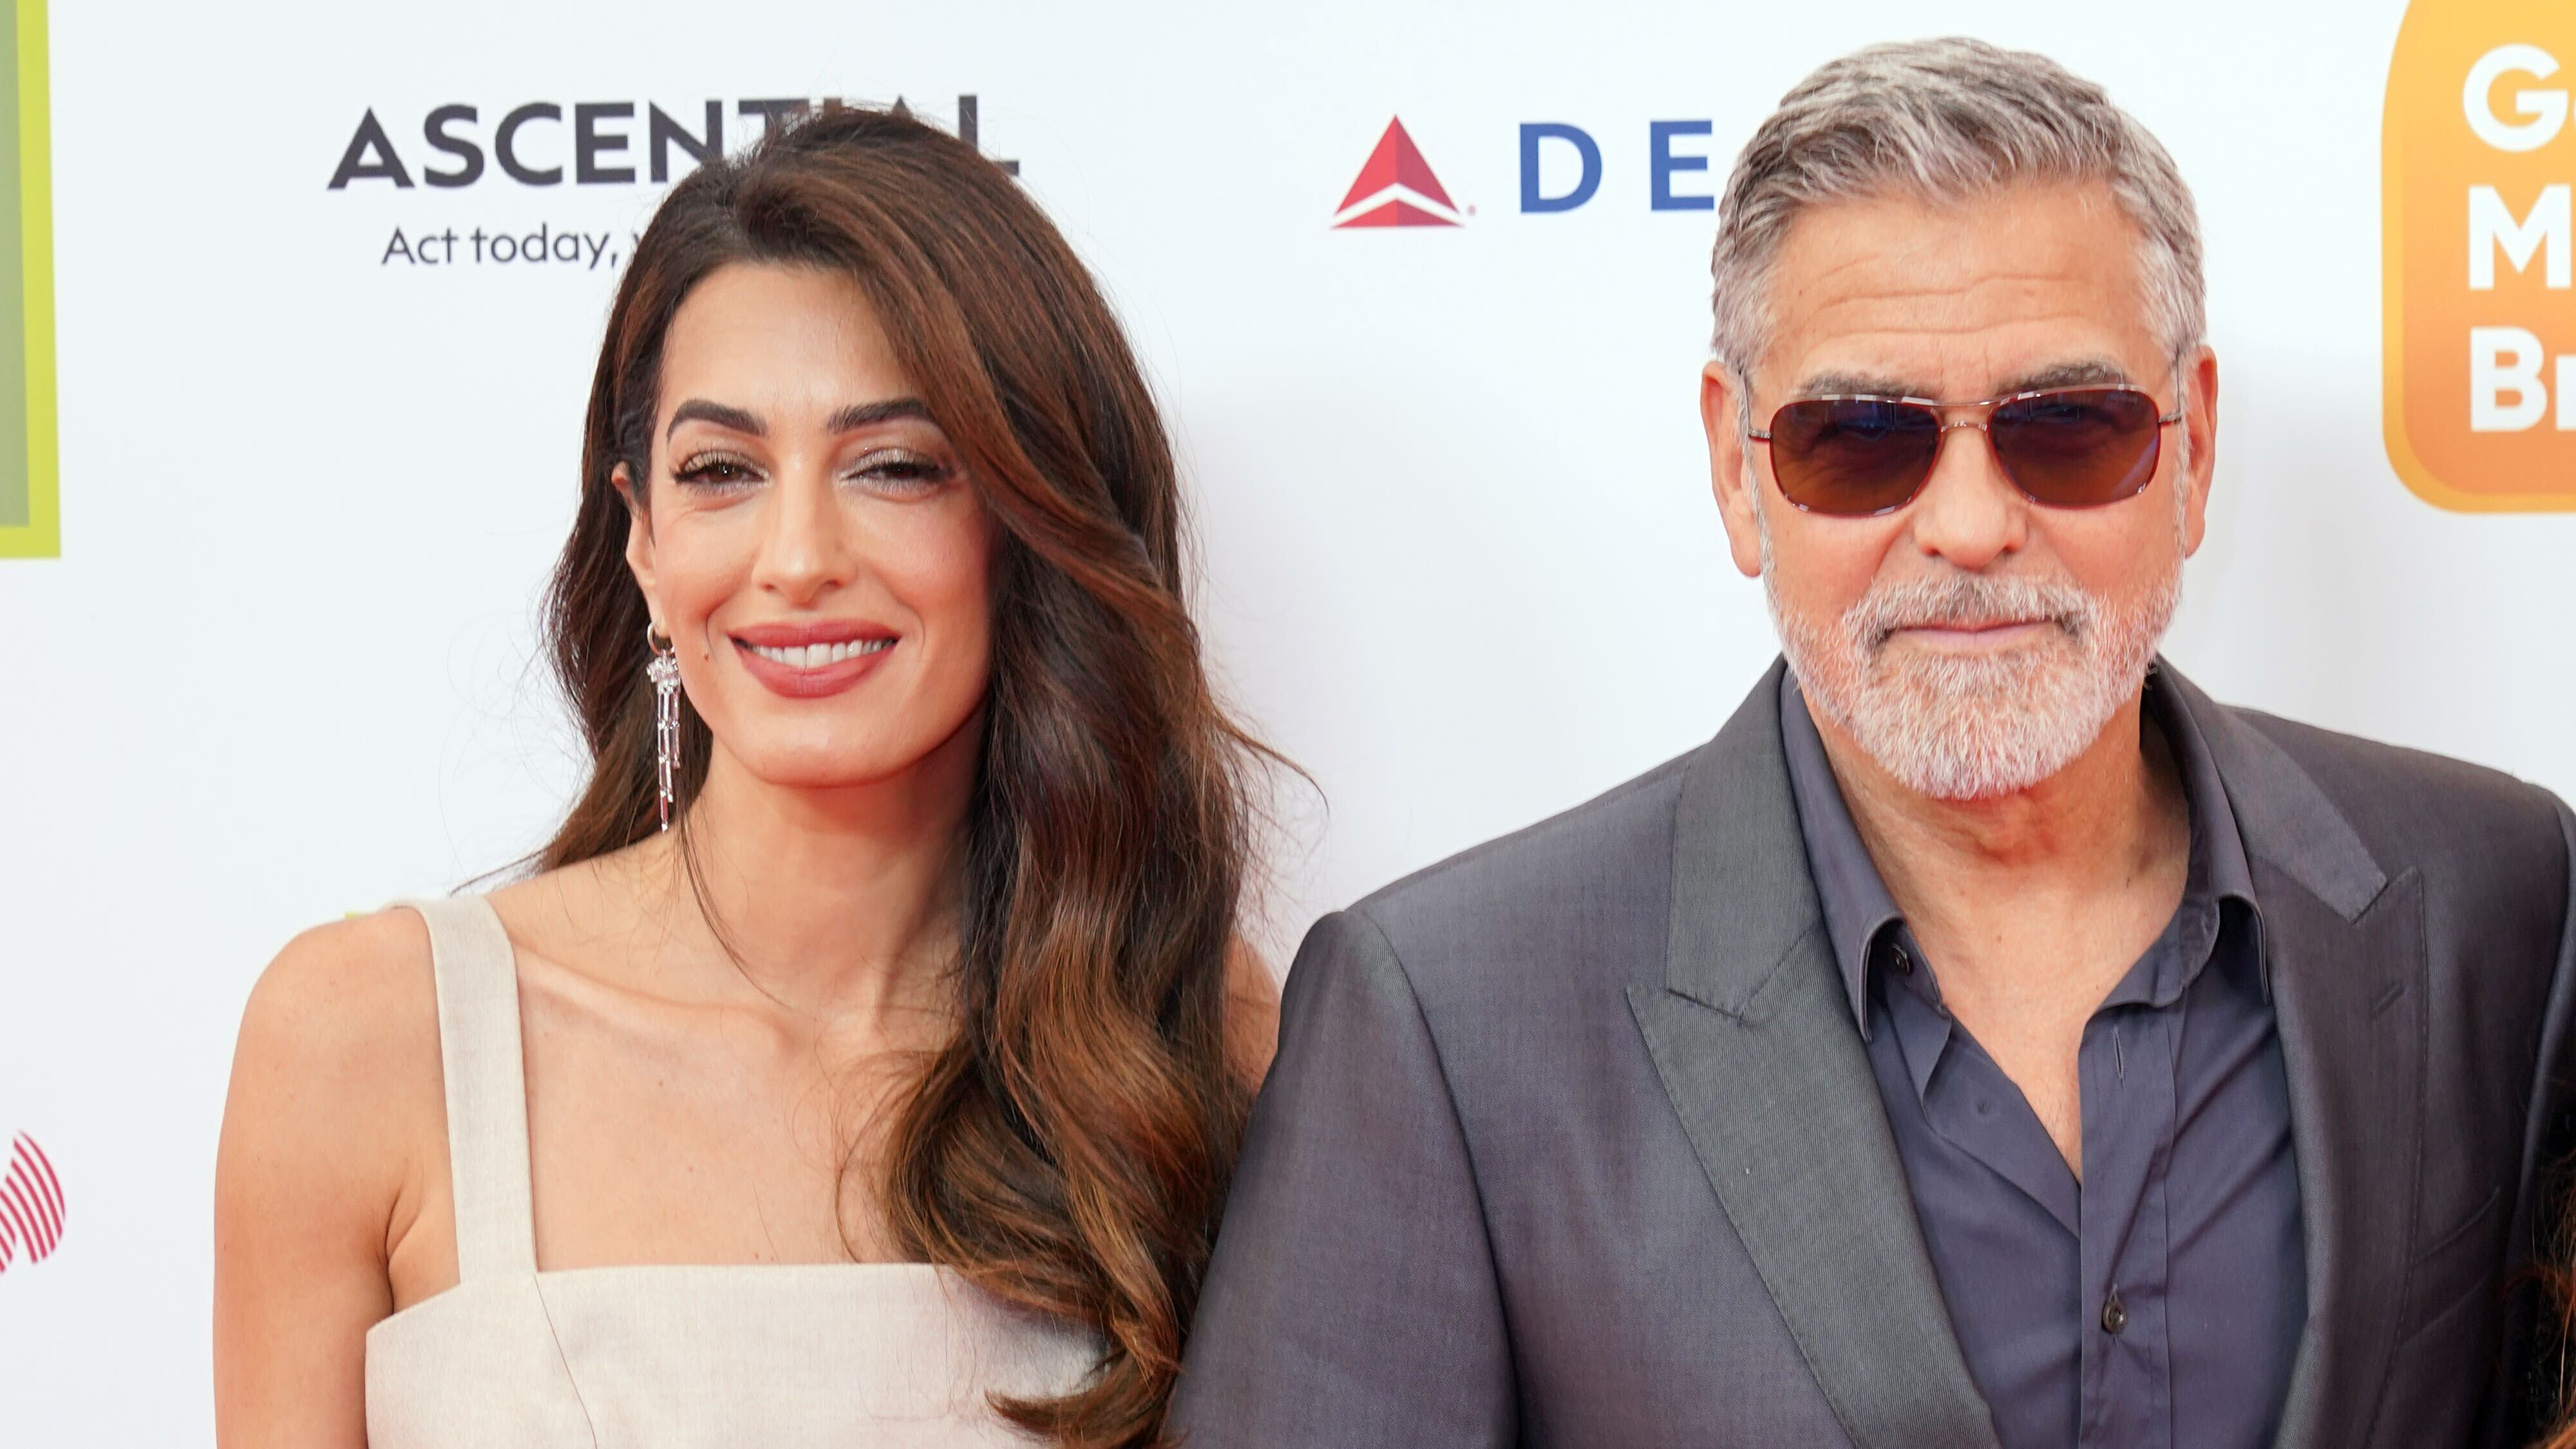 George and Amal Clooney were among the famous faces at the ceremony in London on Tuesday.